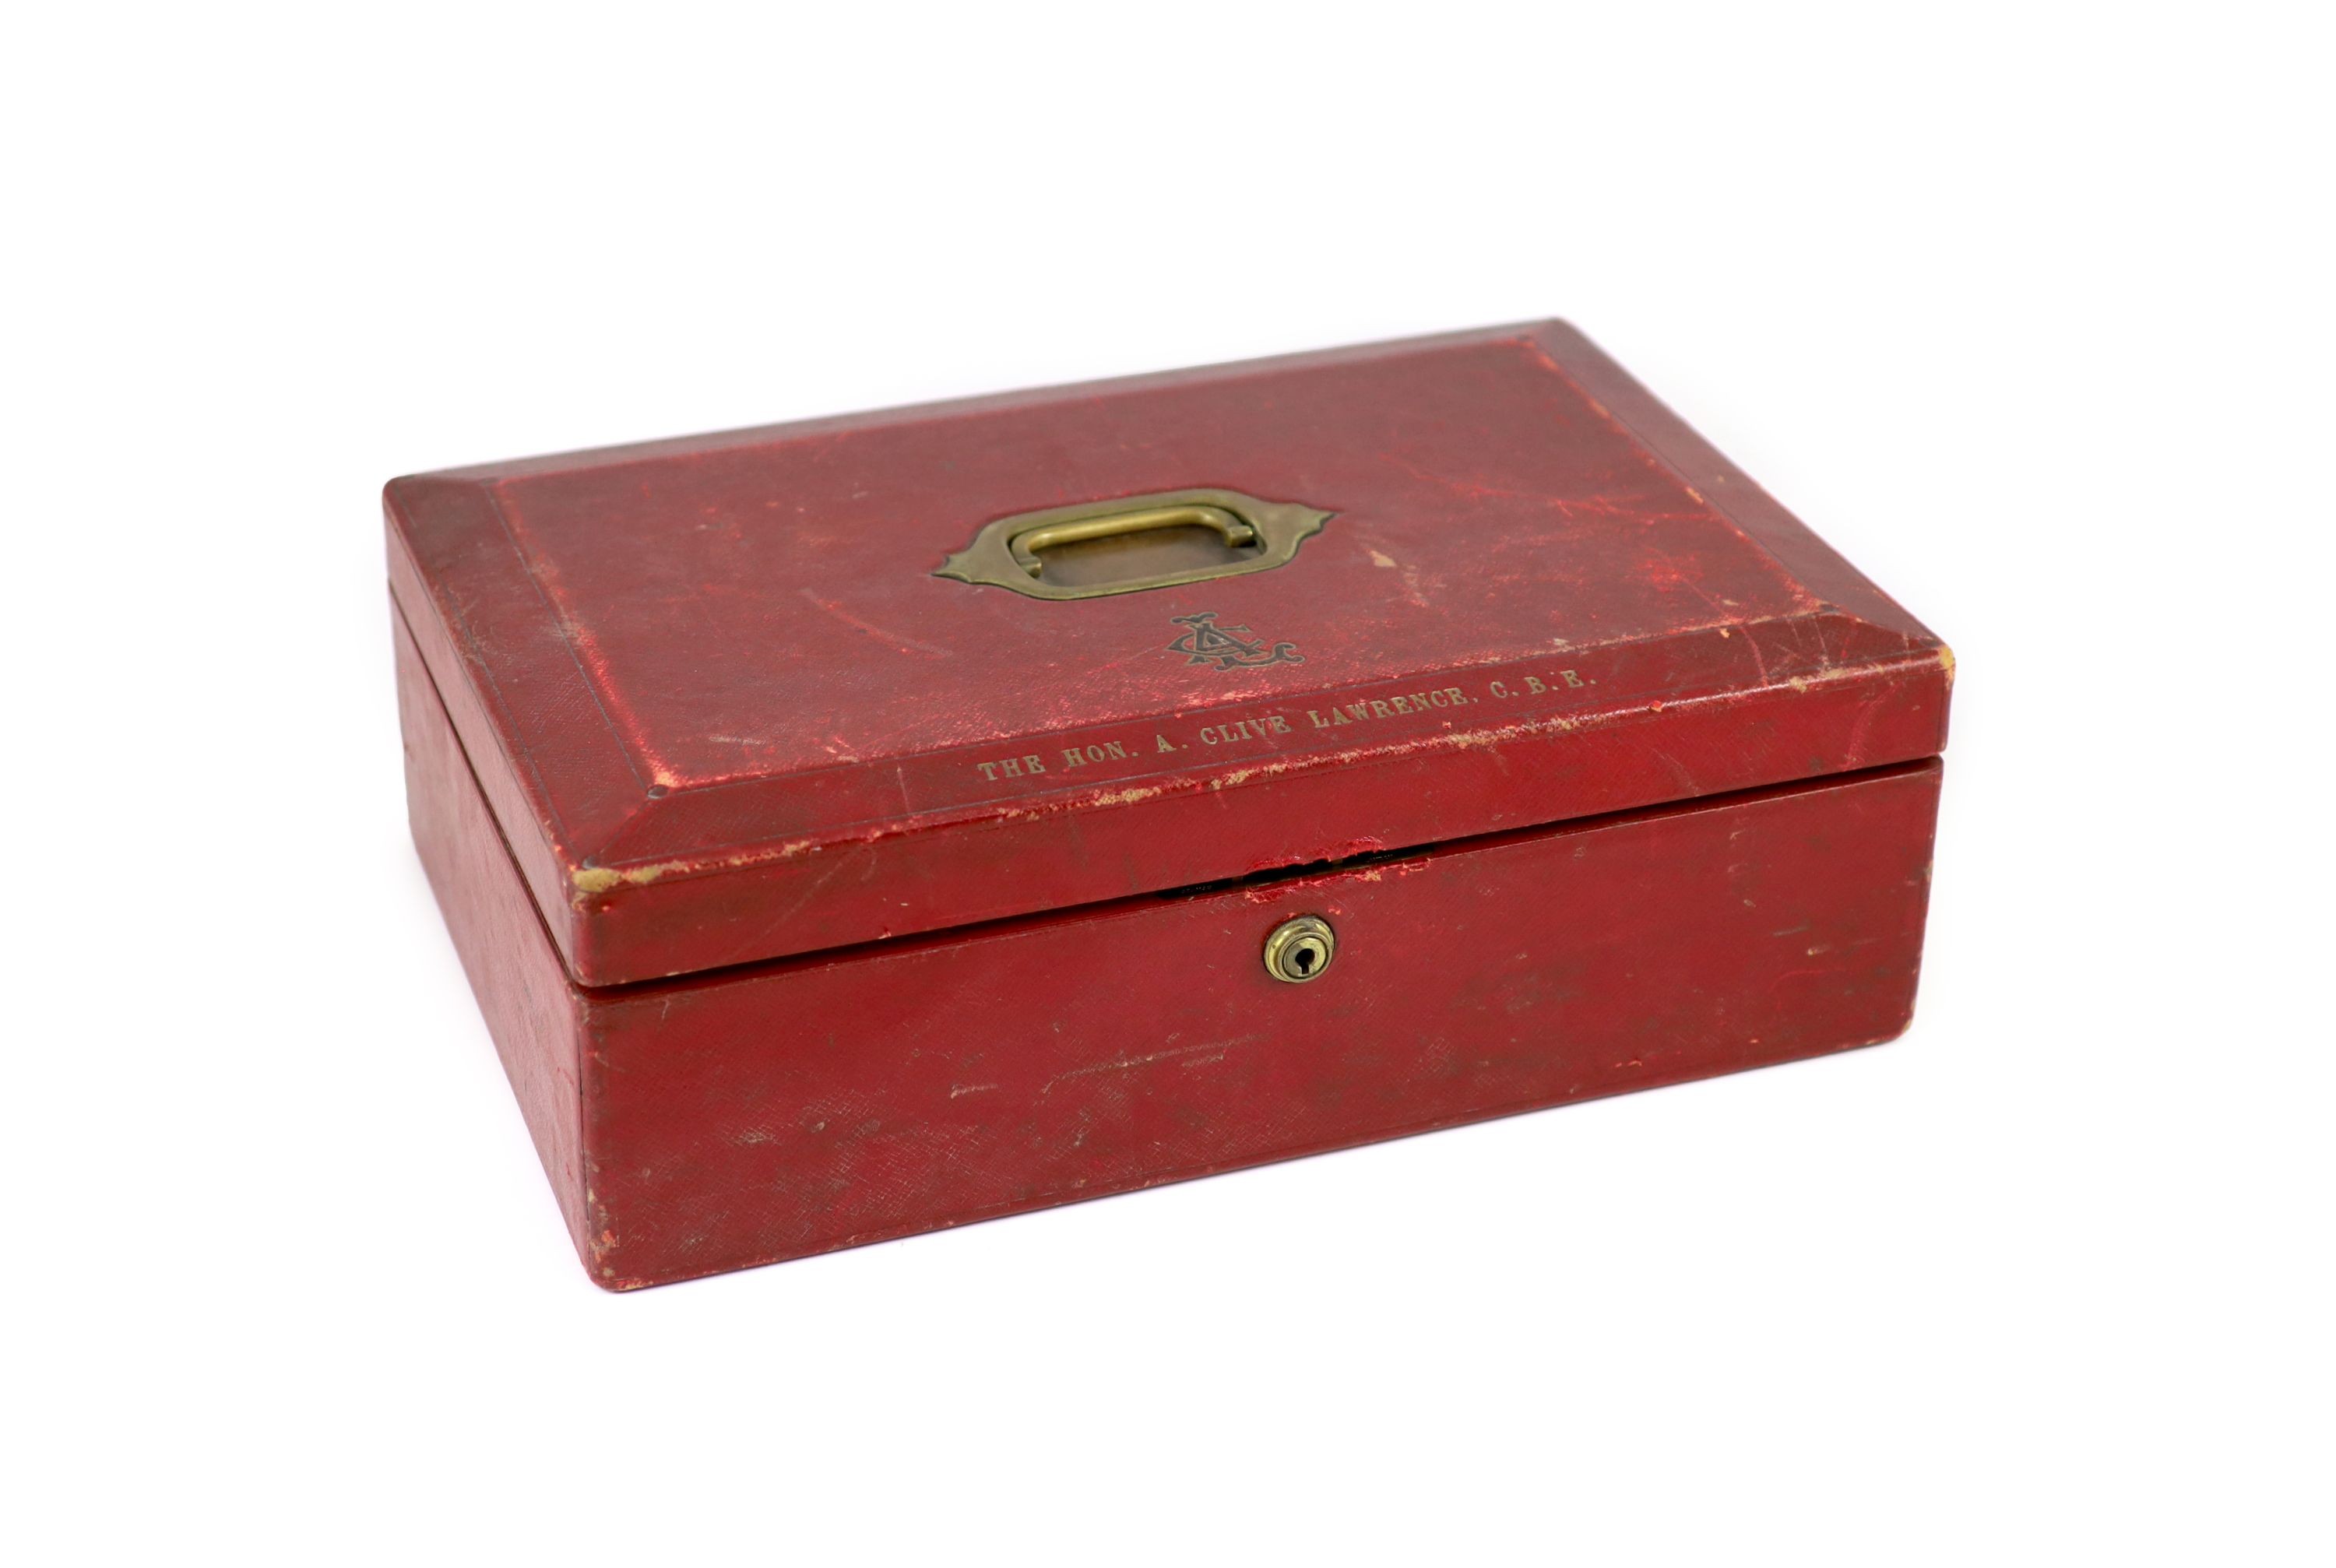 A red leather Morocco leather dispatch box 'The Hon A. Clive Lawrence C.B.E.' by John Peck & Son, Nelson Square, Blackfriars, 46 cm wide